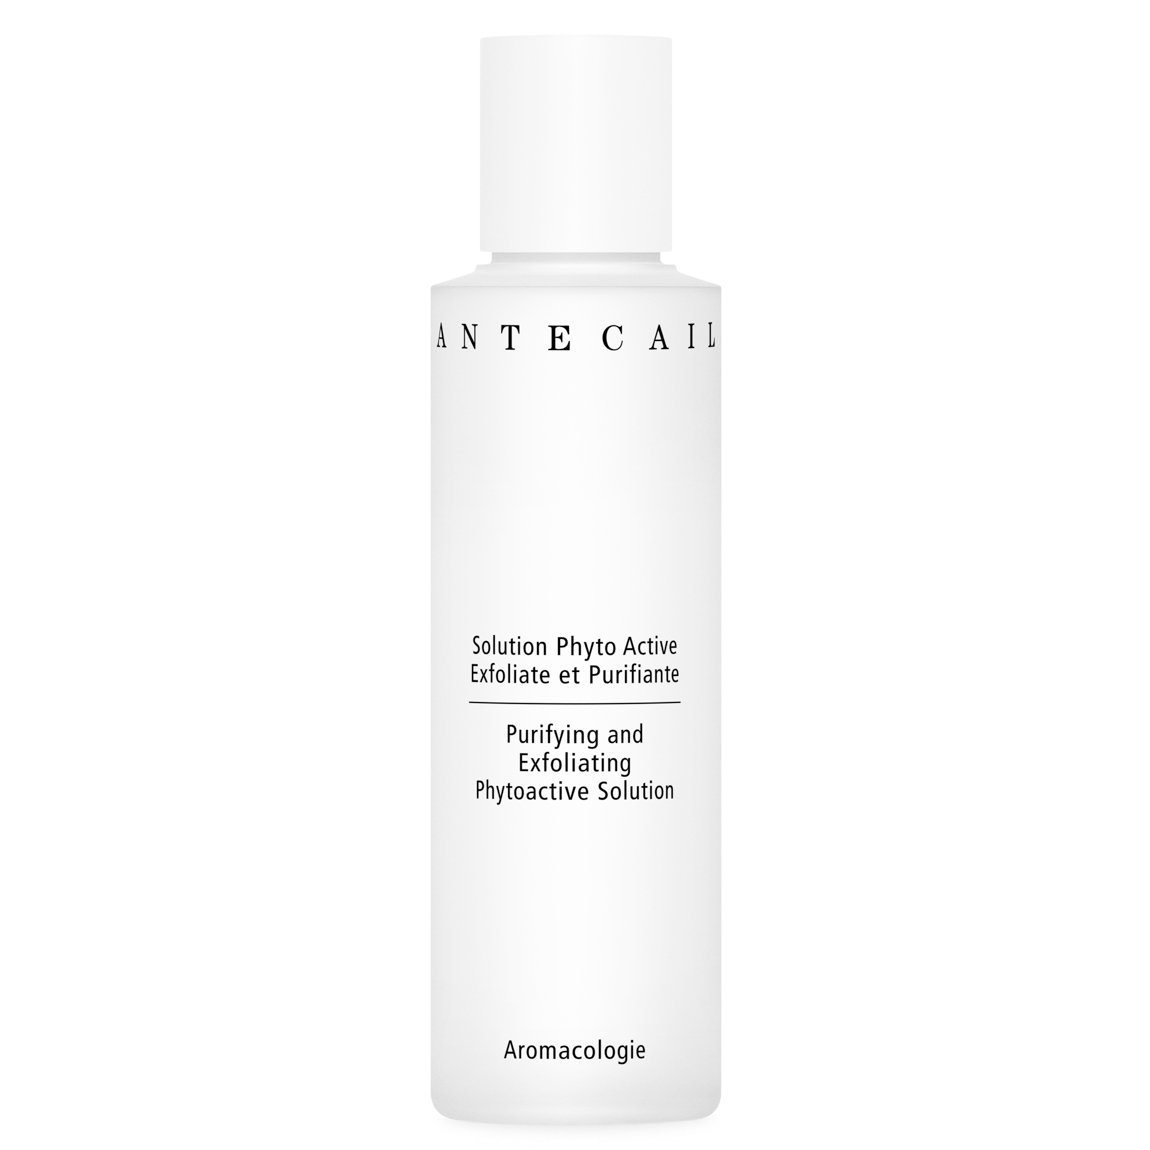 Chantecaille Purifying and Exfoliating Phytoactive Solution alternative view 1 - product swatch.